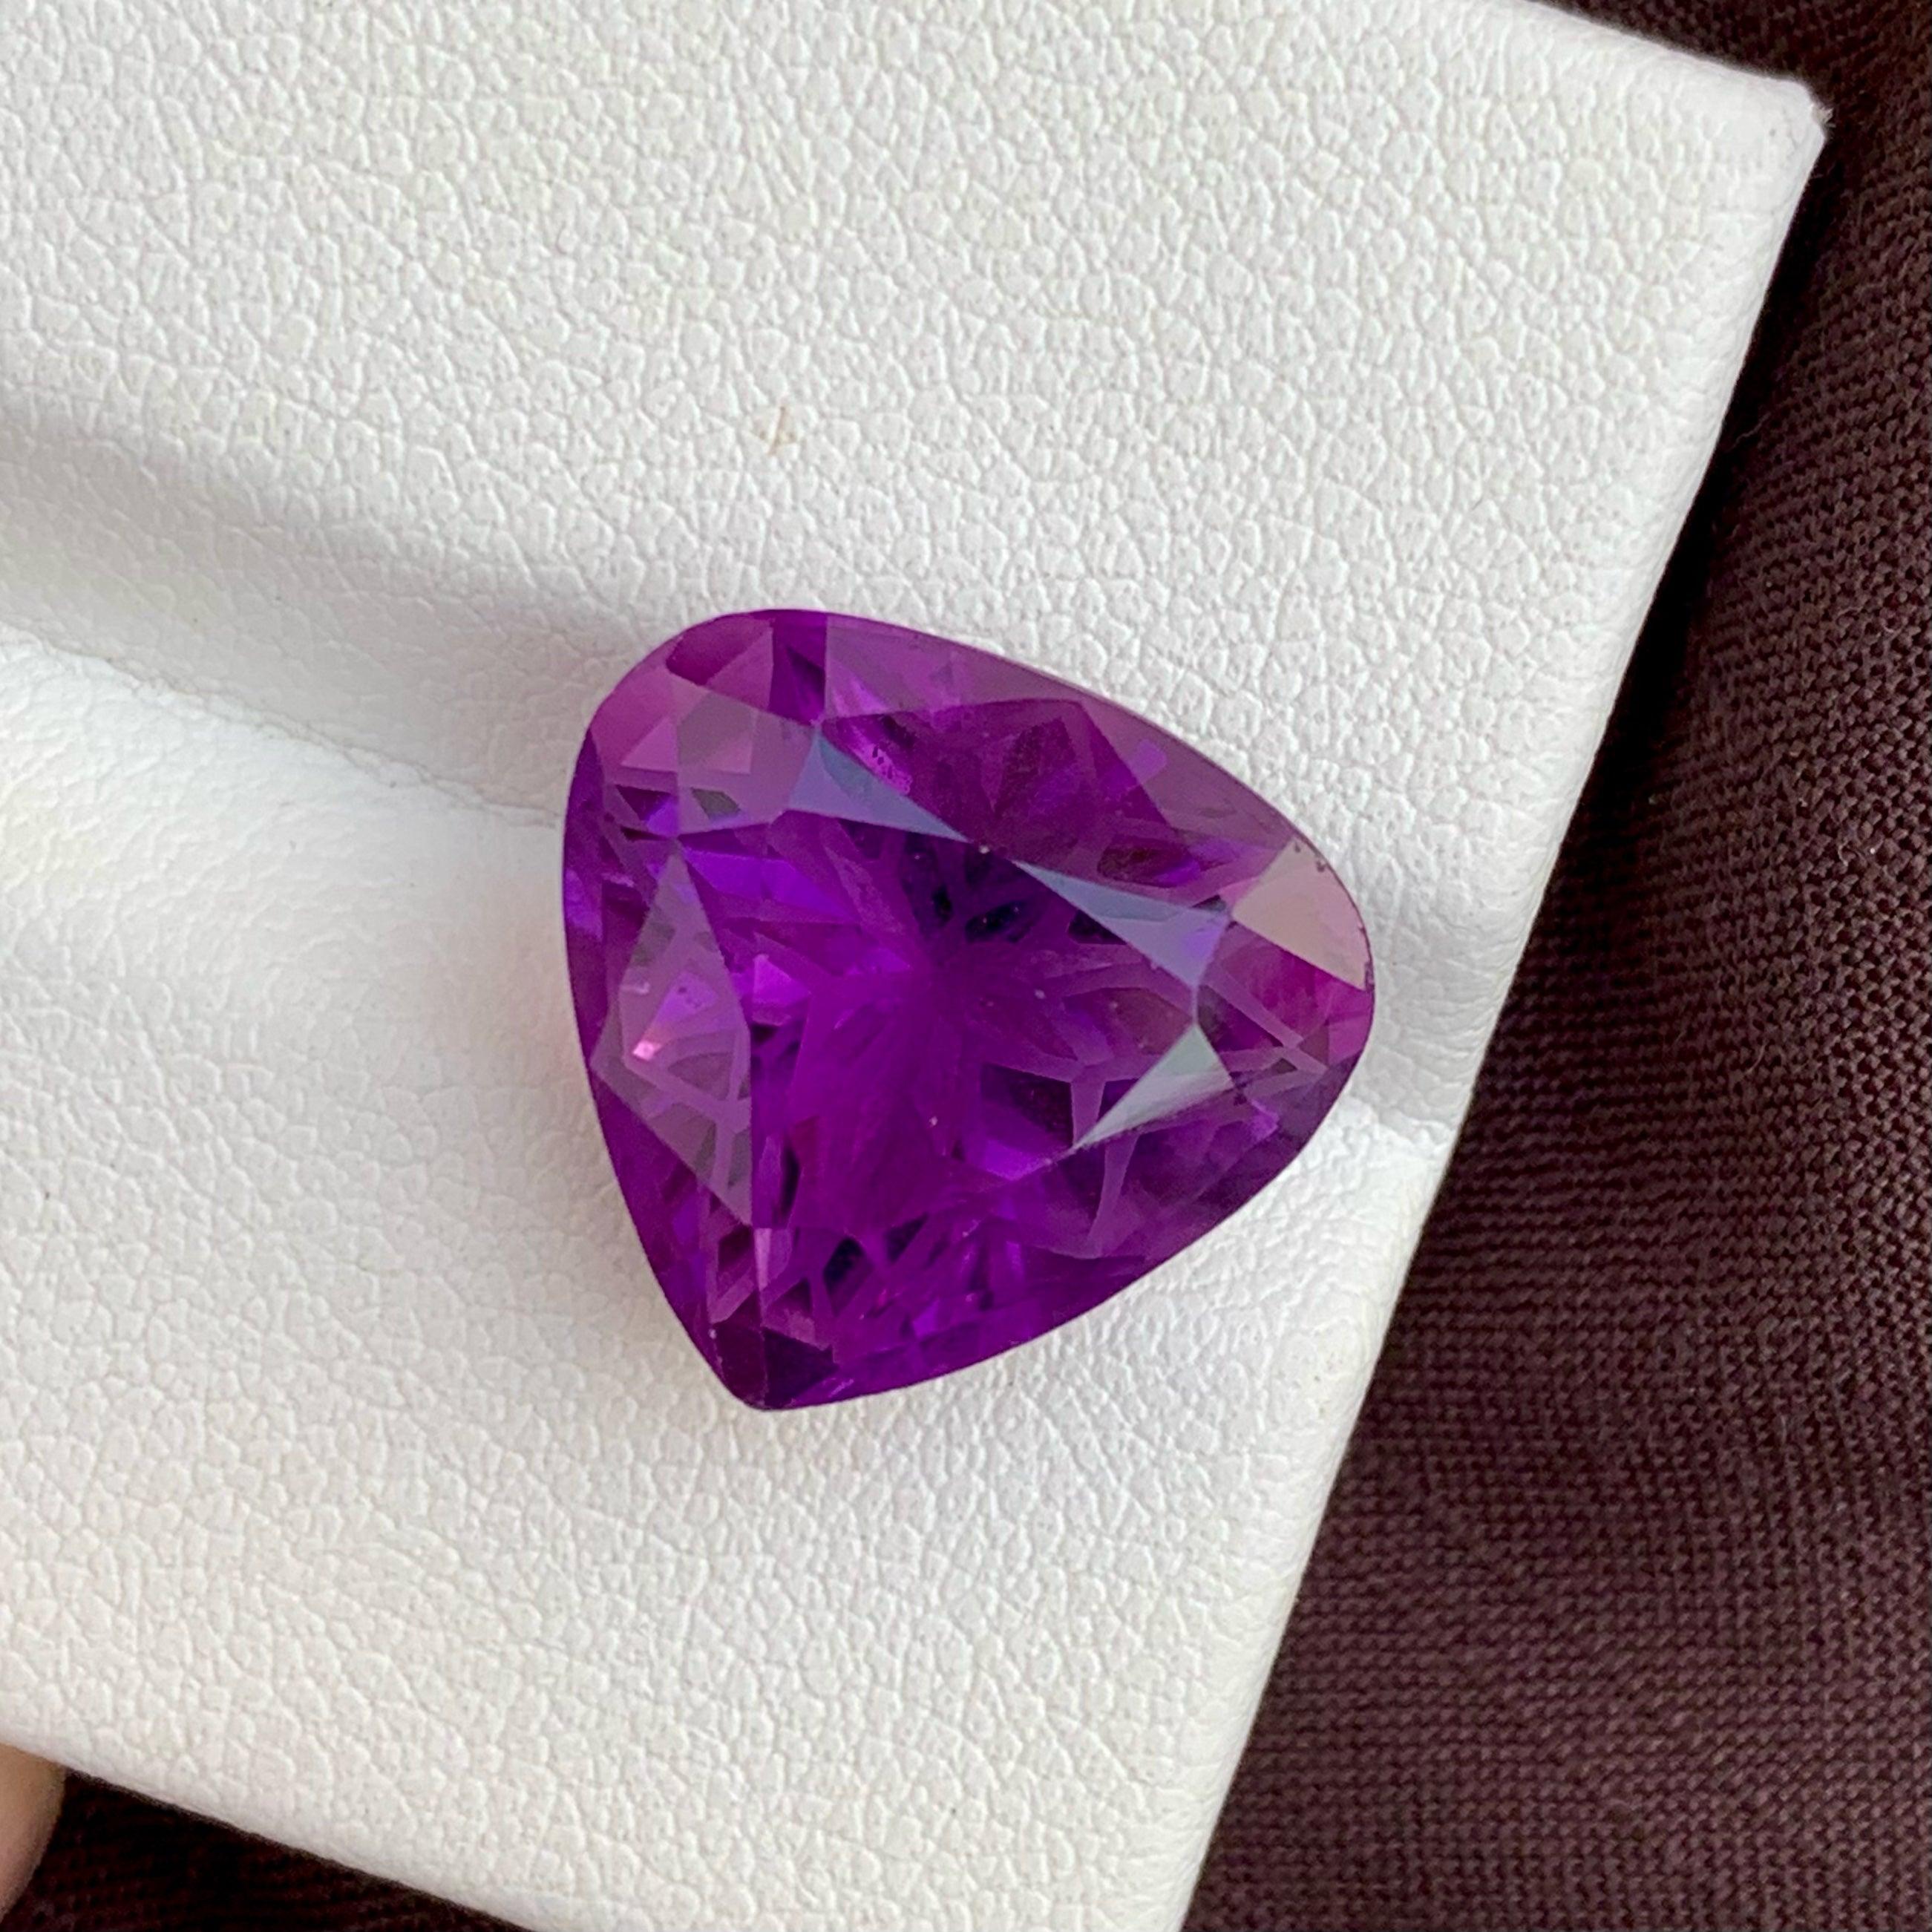 Natural Purple Loose Amethyst Gemstone, available for sale at wholesale natural high quality Cushion shape 11.05 carats faceted Cut  amethyst from Brazil.

 Product Information:
GEMSTONE TYPE:	Natural Purple Loose Amethyst Gemstone
WEIGHT:	11.05